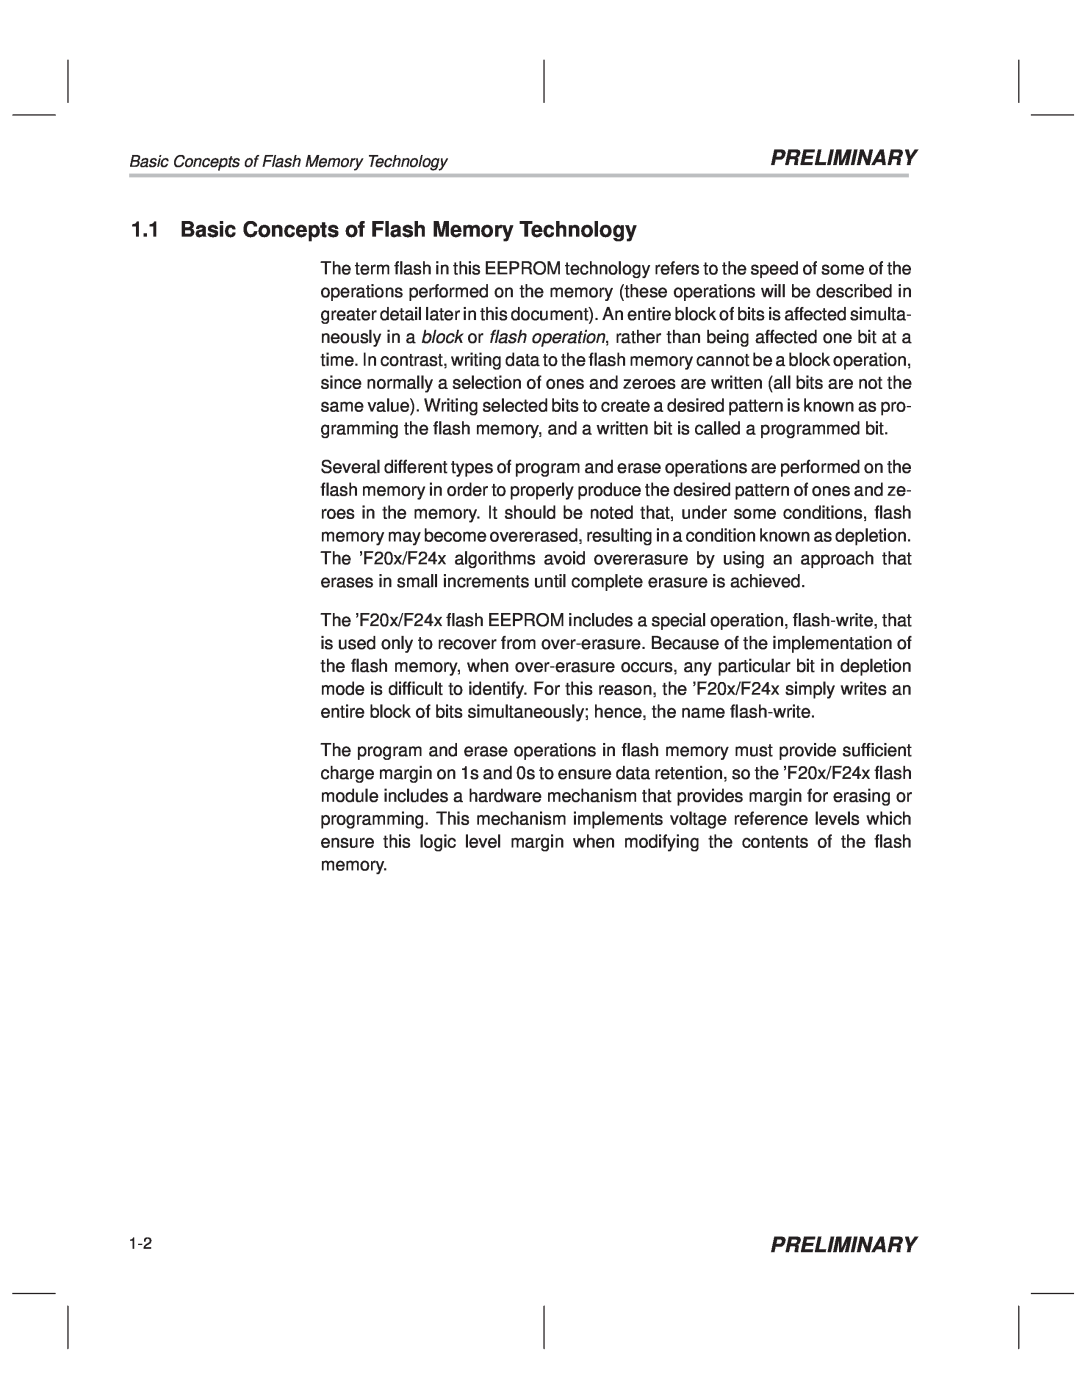 Texas Instruments TMS320F20x/F24x DSP manual Basic Concepts of Flash Memory Technology, Preliminary 